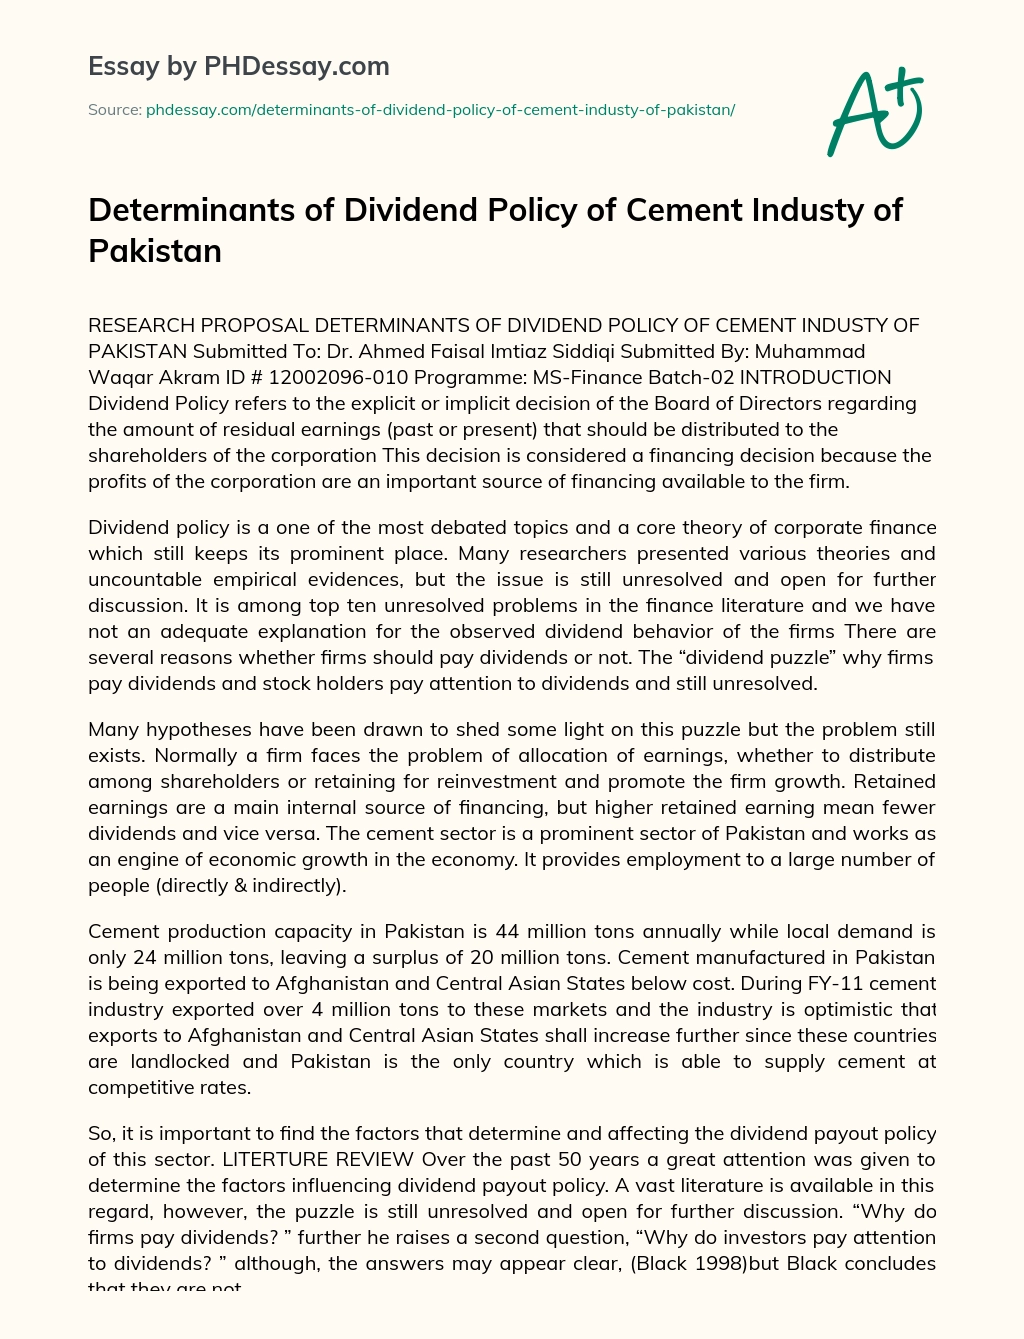 Determinants of Dividend Policy of Cement Industy of Pakistan essay